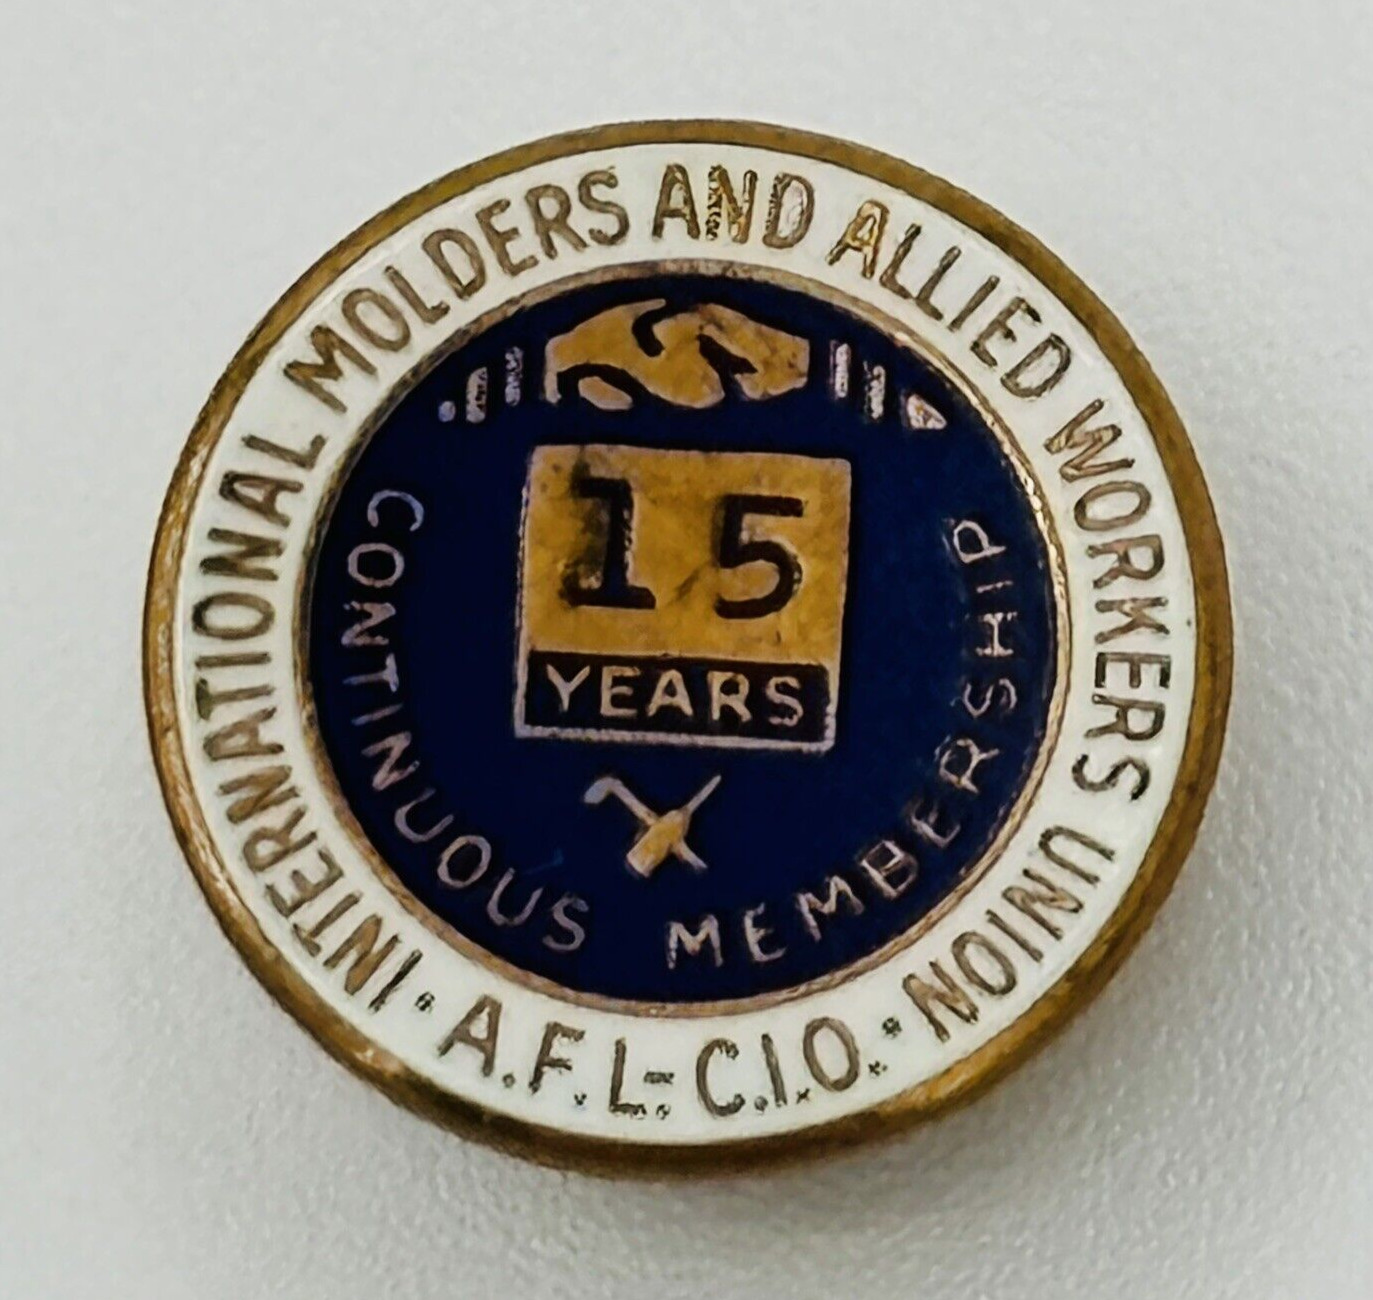 Vtg International Molders and Allied Workers Union 15 Years Membership Lapel Pin